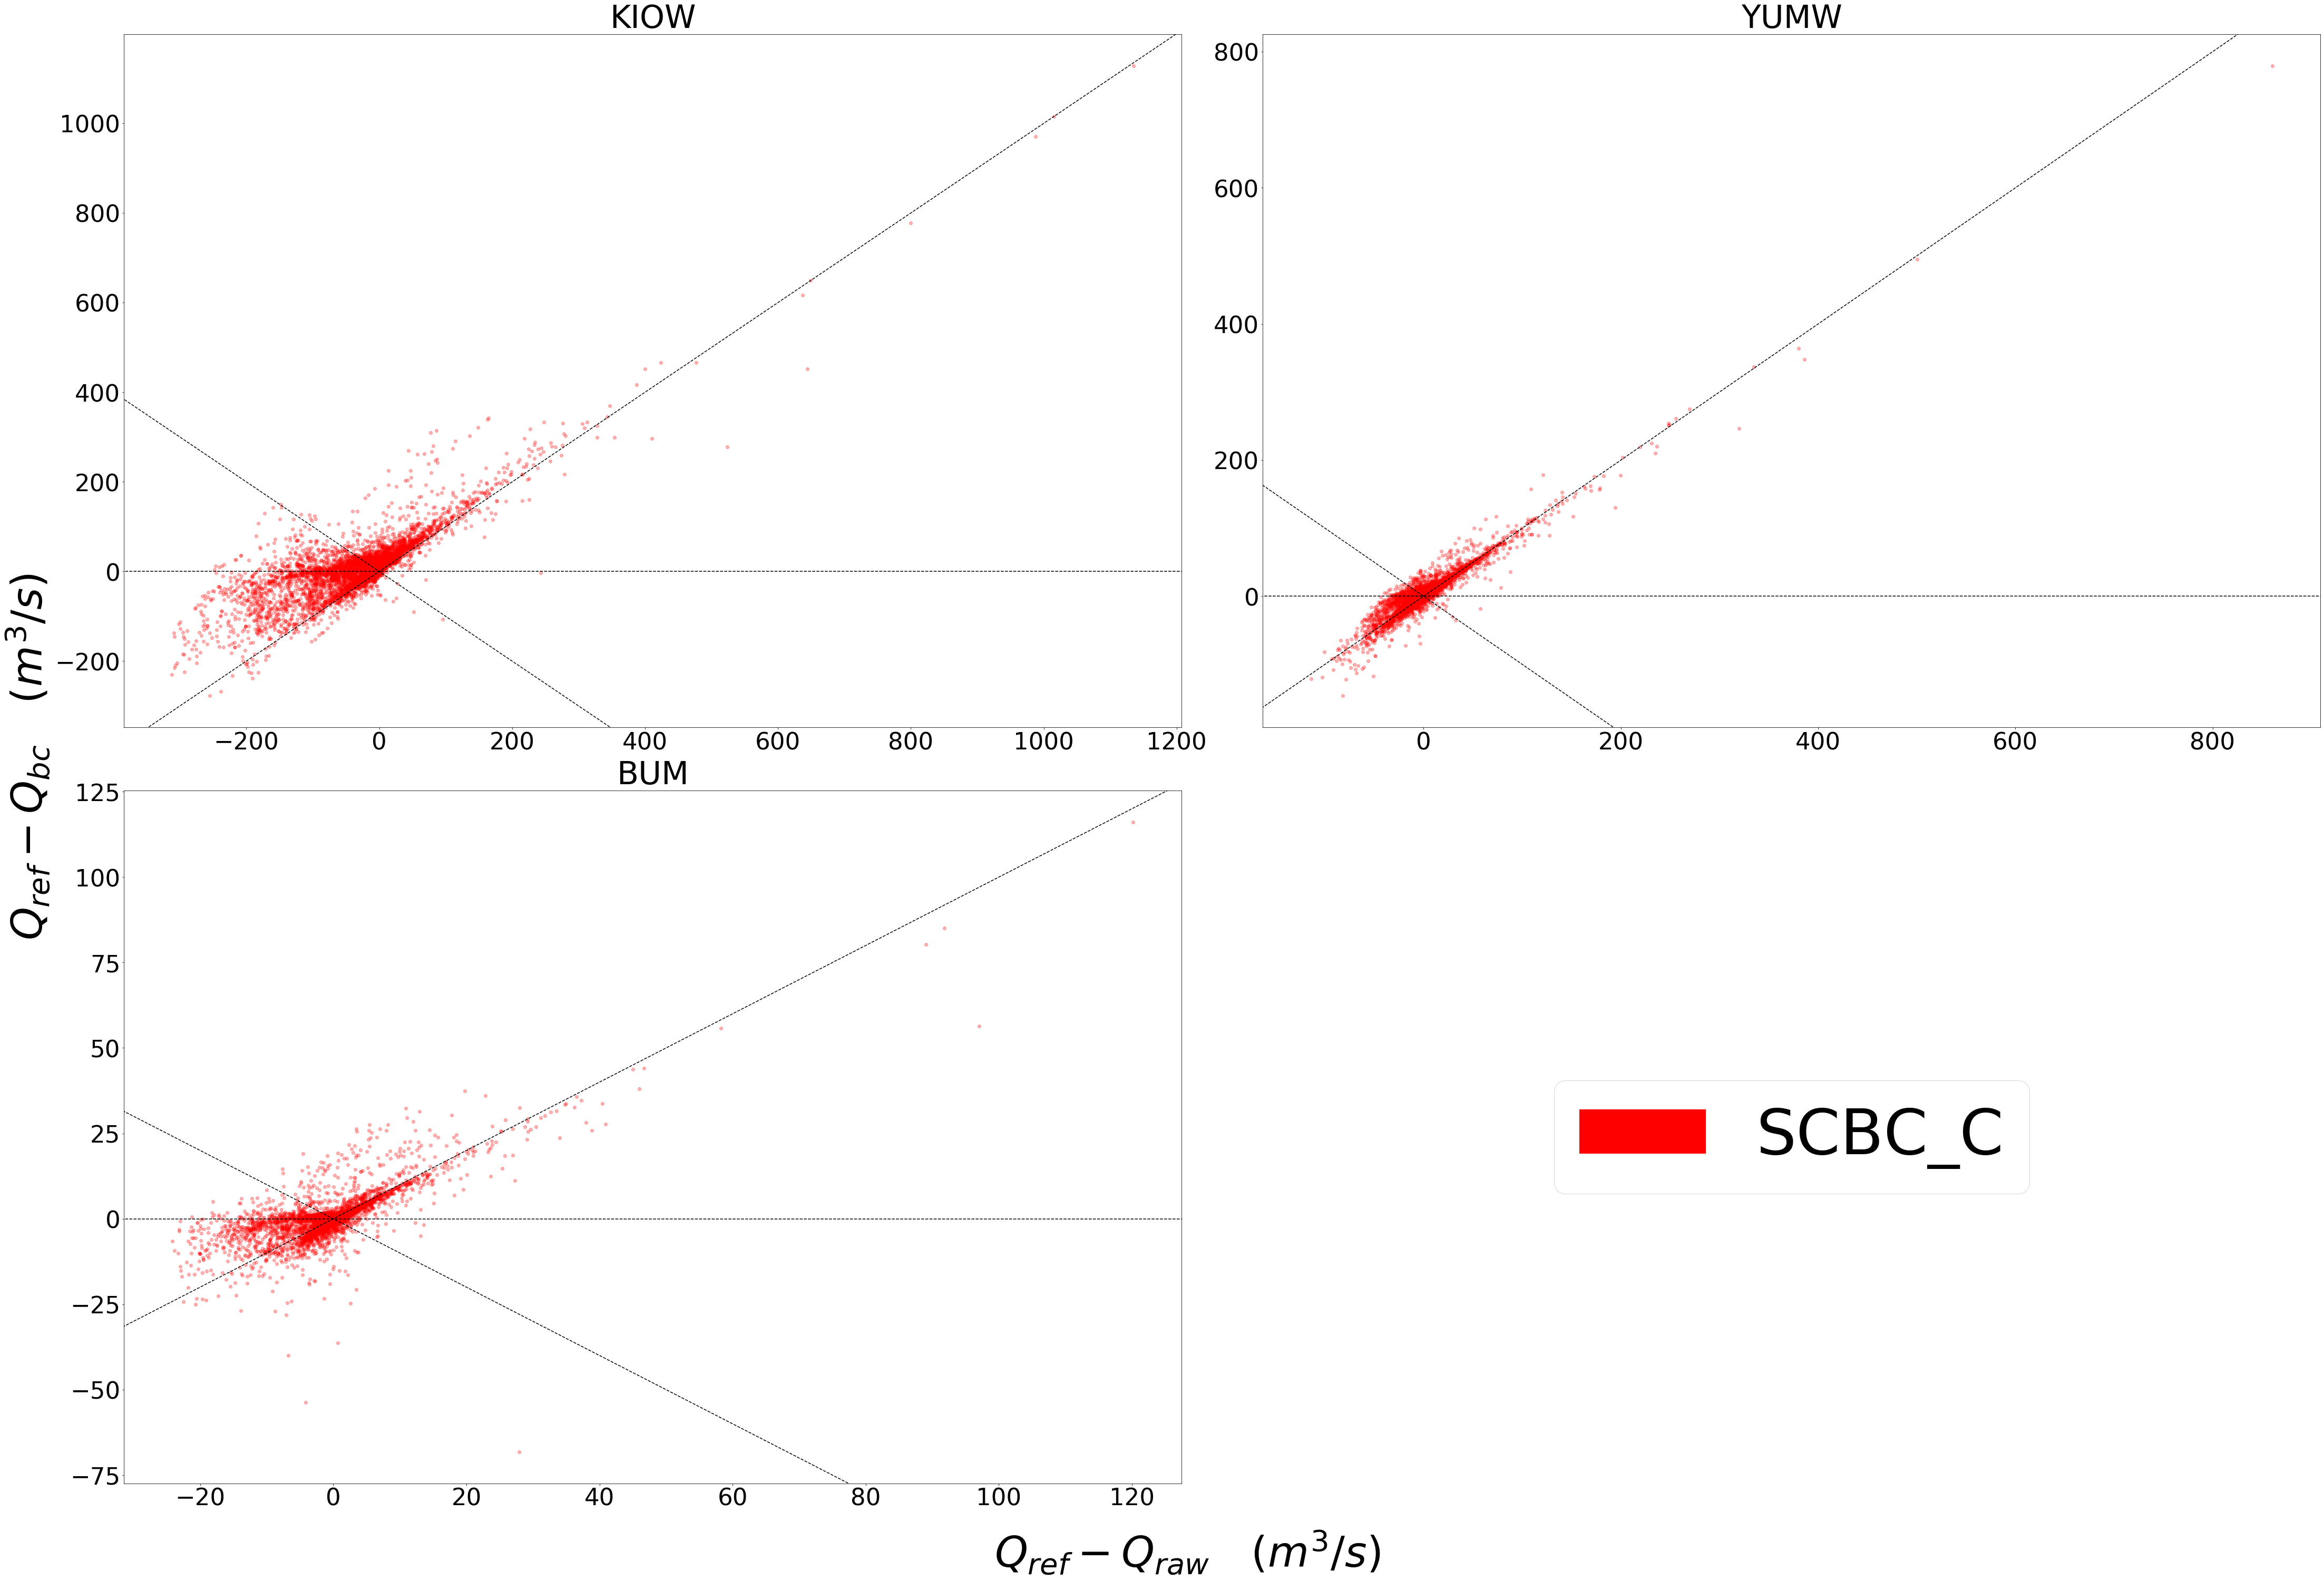 Three scatter plots labeled KIOW, YUMW, and BUM are shown, comparing differences in flow between reference data and the raw data on the horizontal axis while differences between the reference data and bias corrected data are plotted on the vertical axis. 1 to 1 and -1 to 1 lines are plotted for reference.